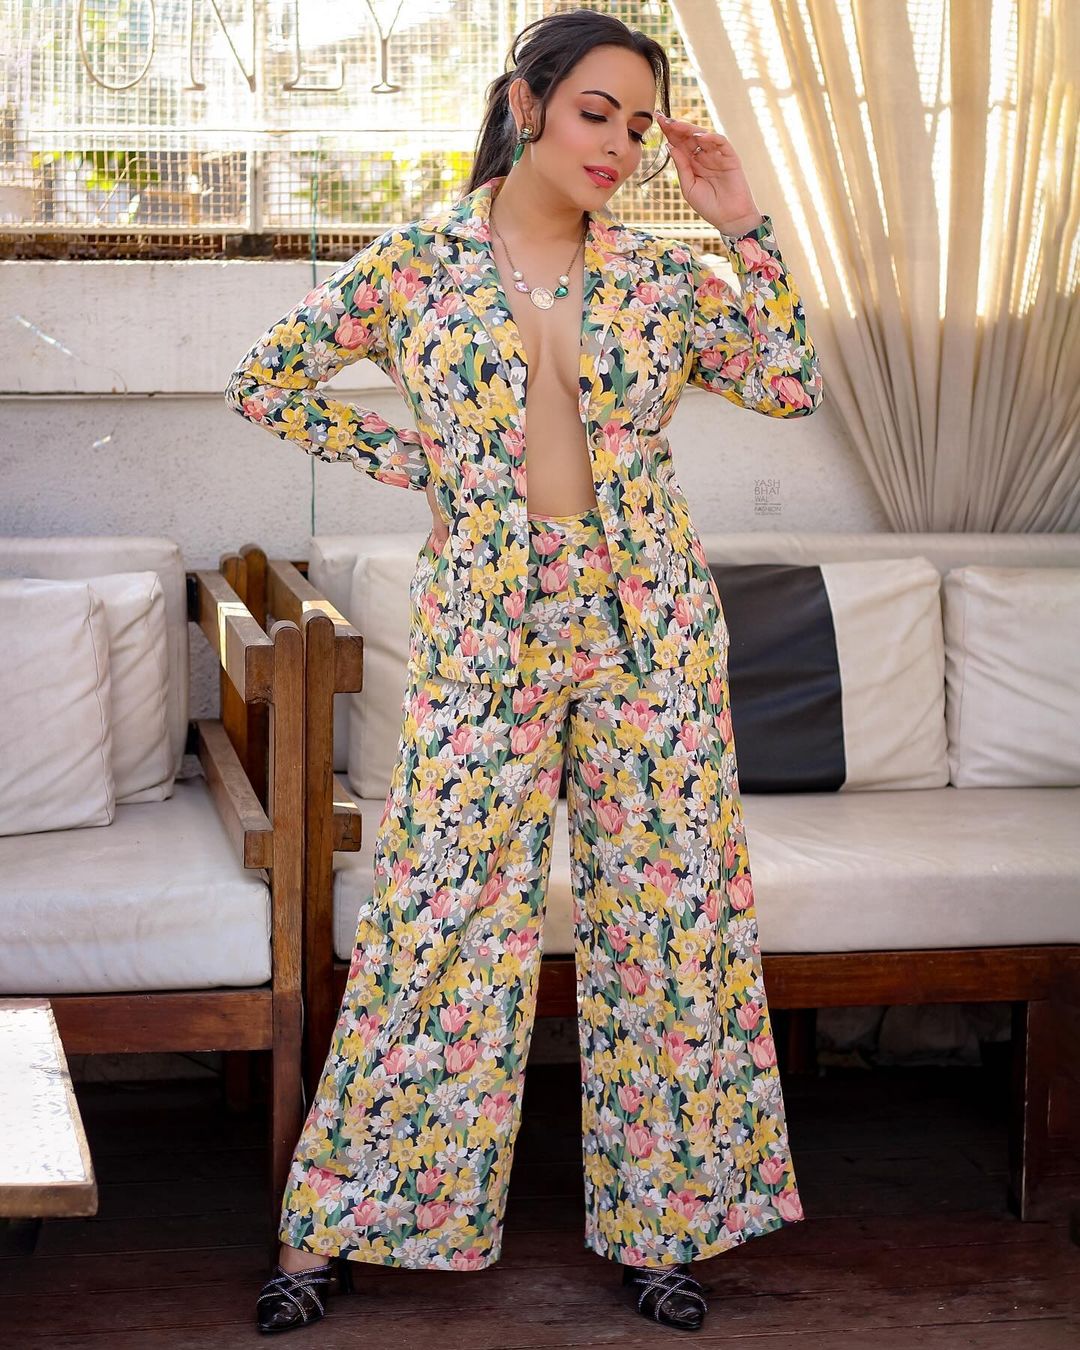 Anchal munjal is winning the hearts of guys with her floral print blazer charms-Aanchal Munjal, Aanchalmunjal, Anchal Munjal Photos,Spicy Hot Pics,Images,High Resolution WallPapers Download